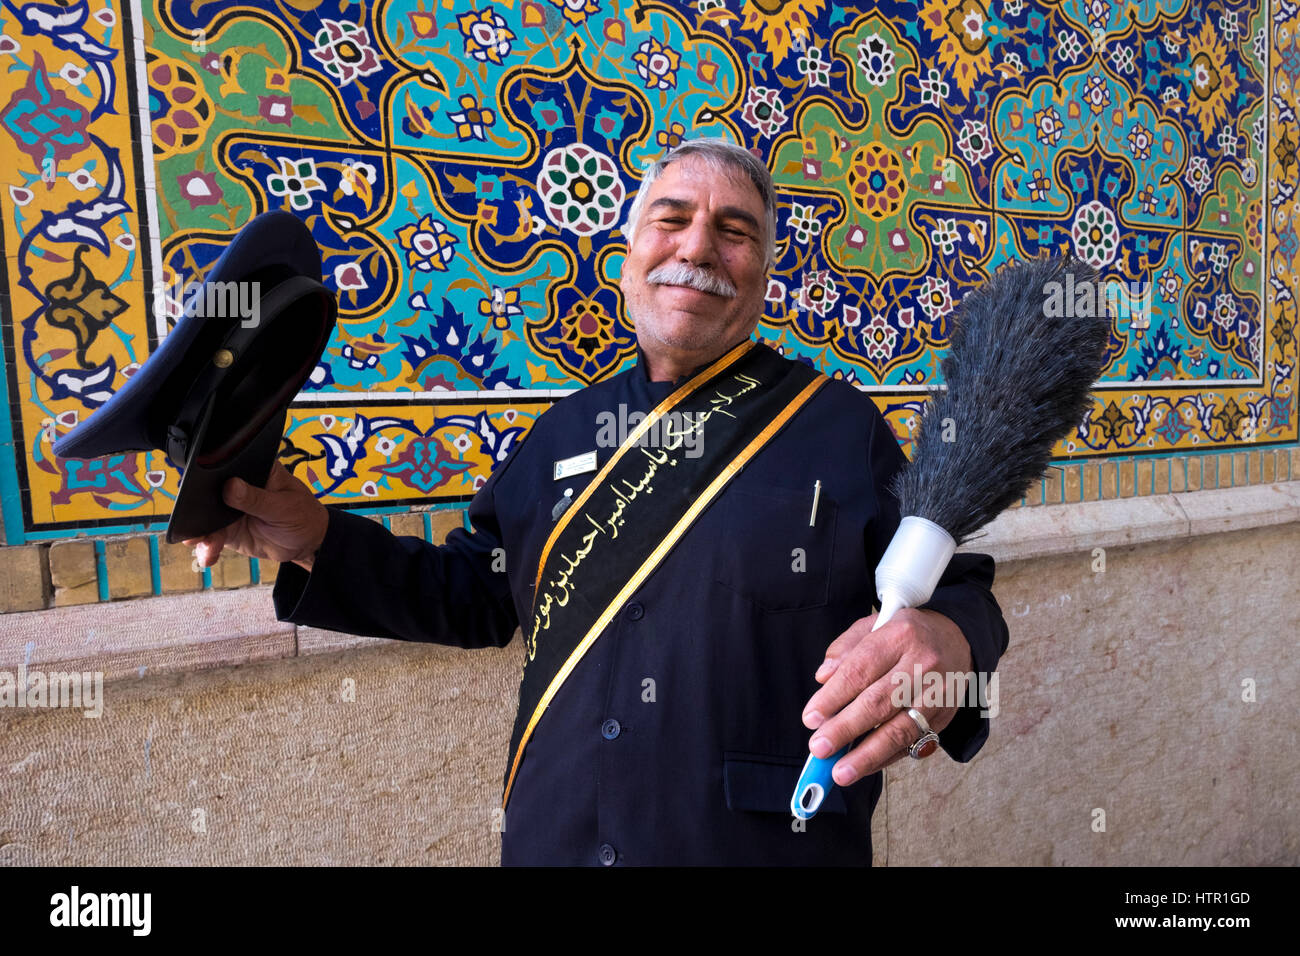 A religious attendant relaxes with a duster at the entrance of the Shah Cheragh Shrine in Shiraz, Fars Province, Iran Stock Photo